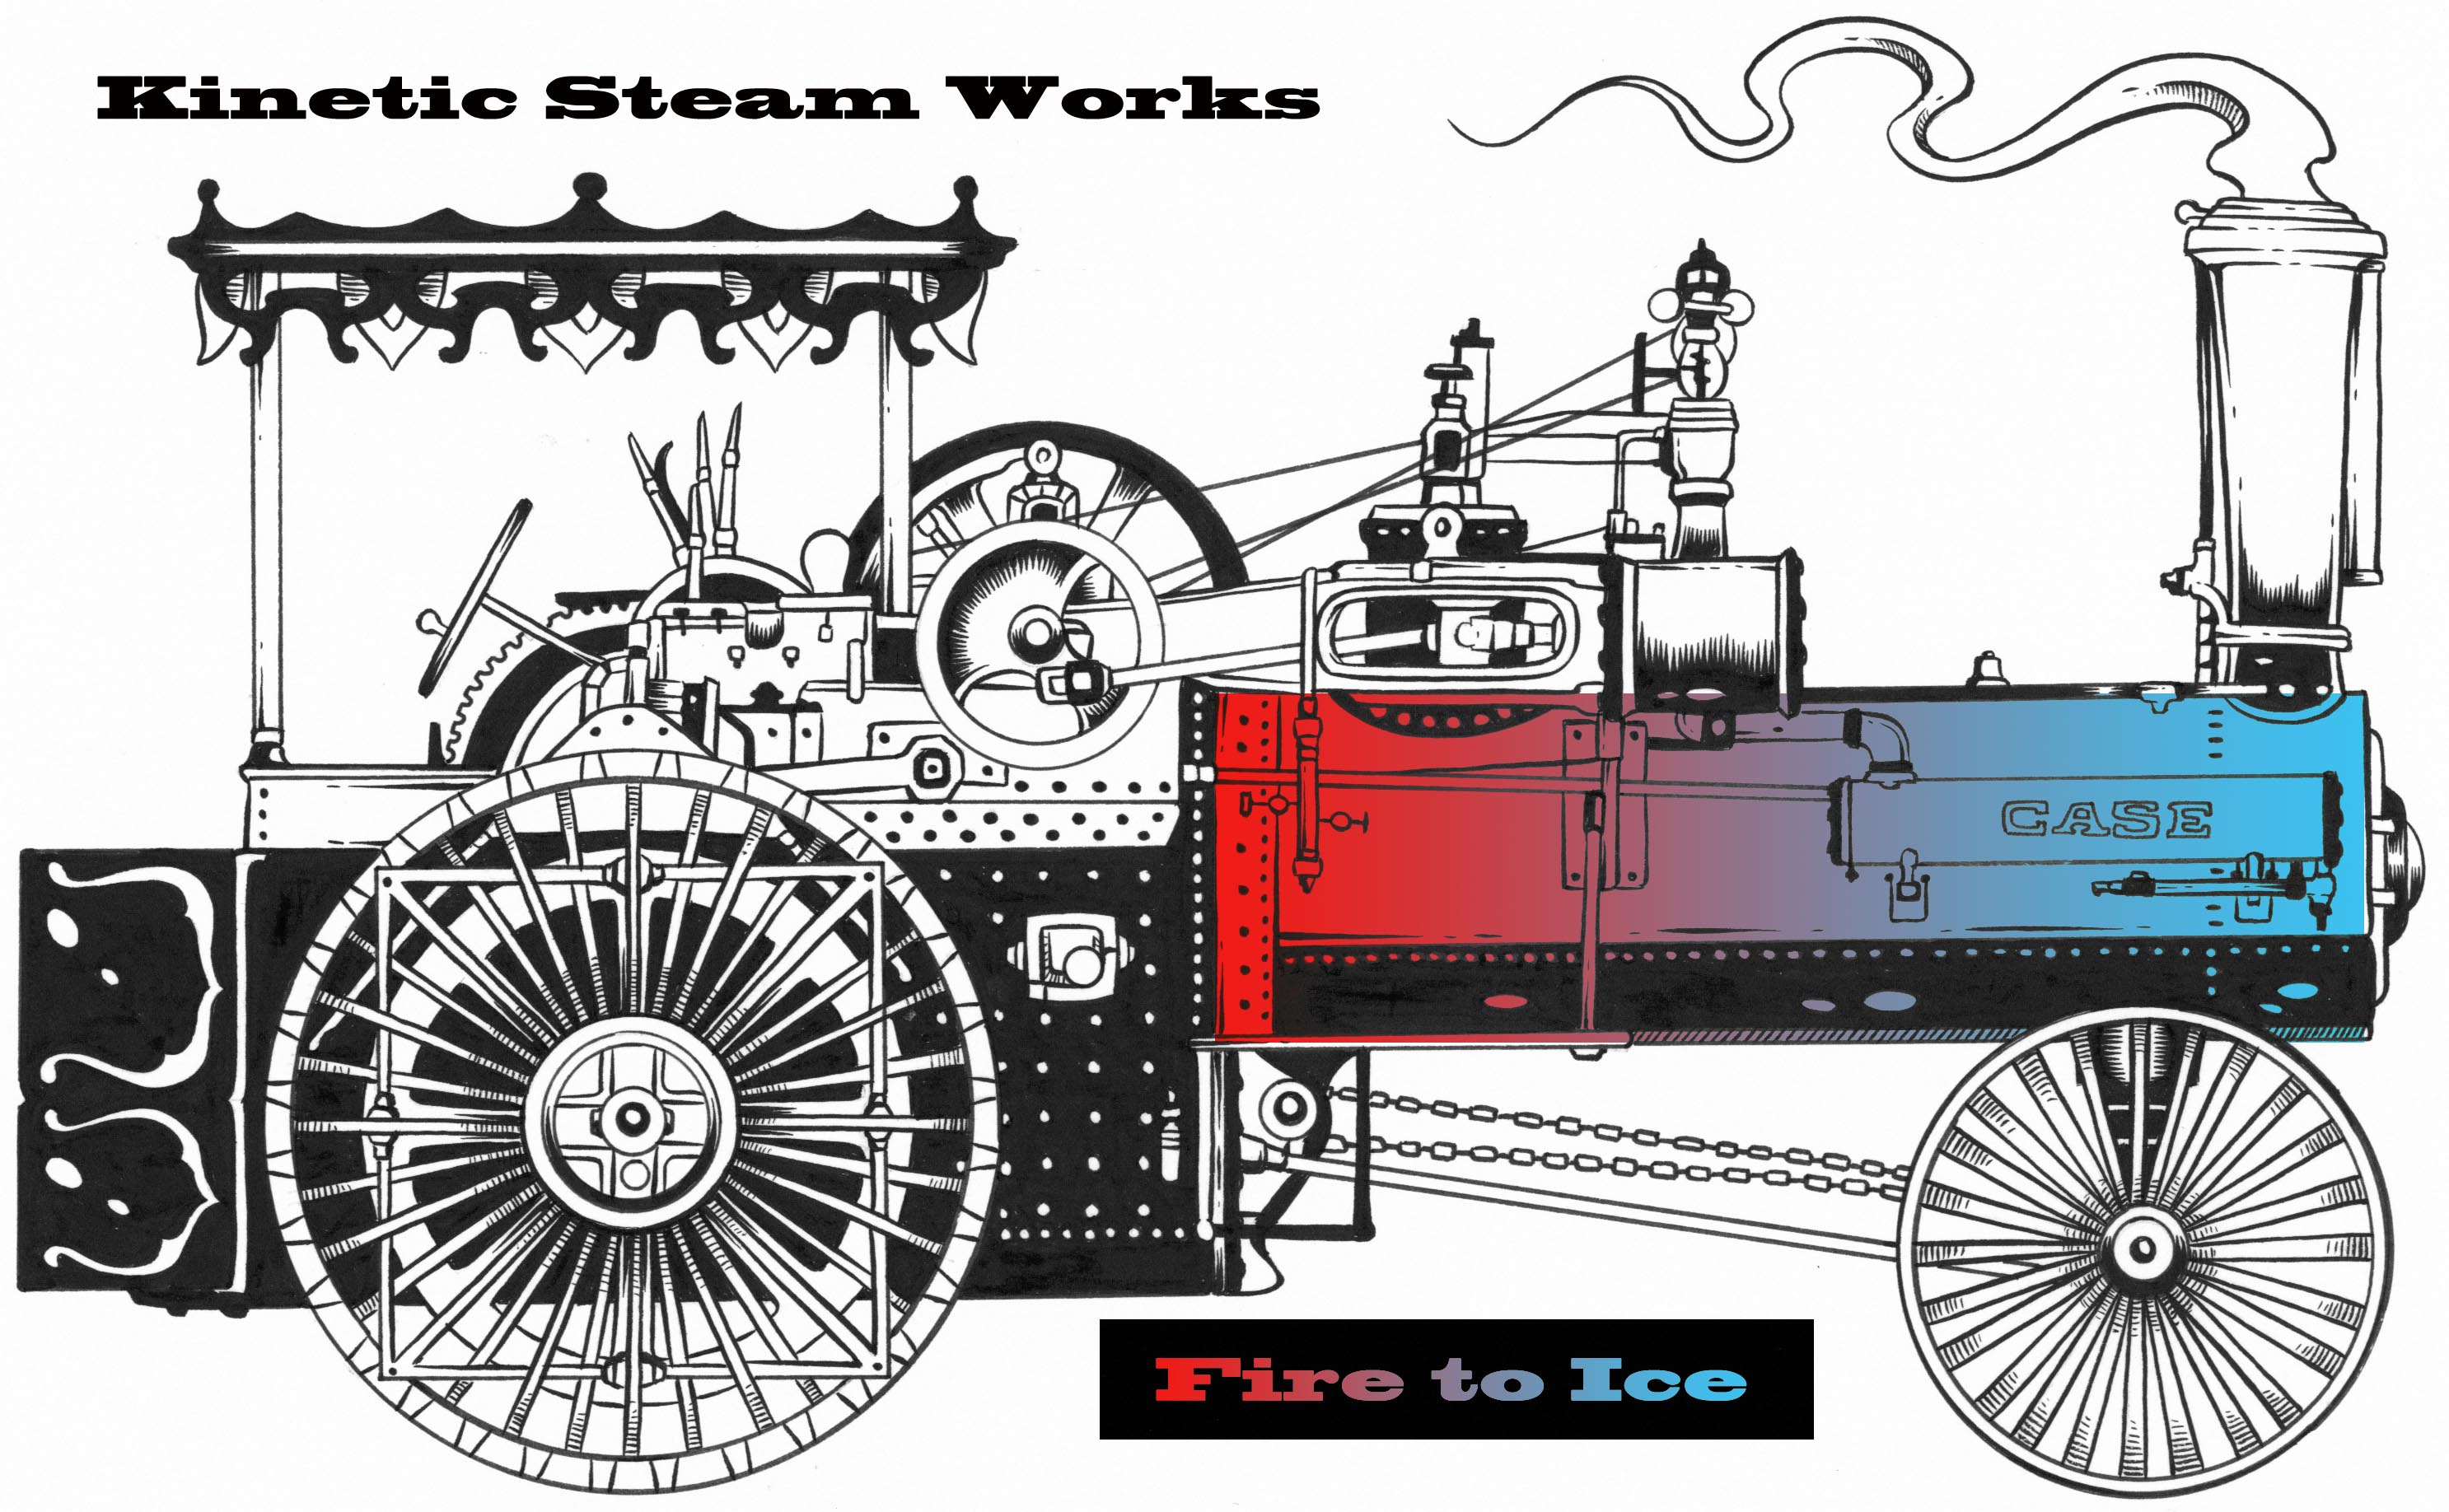 Fire into Ice- steam powered refrigeration